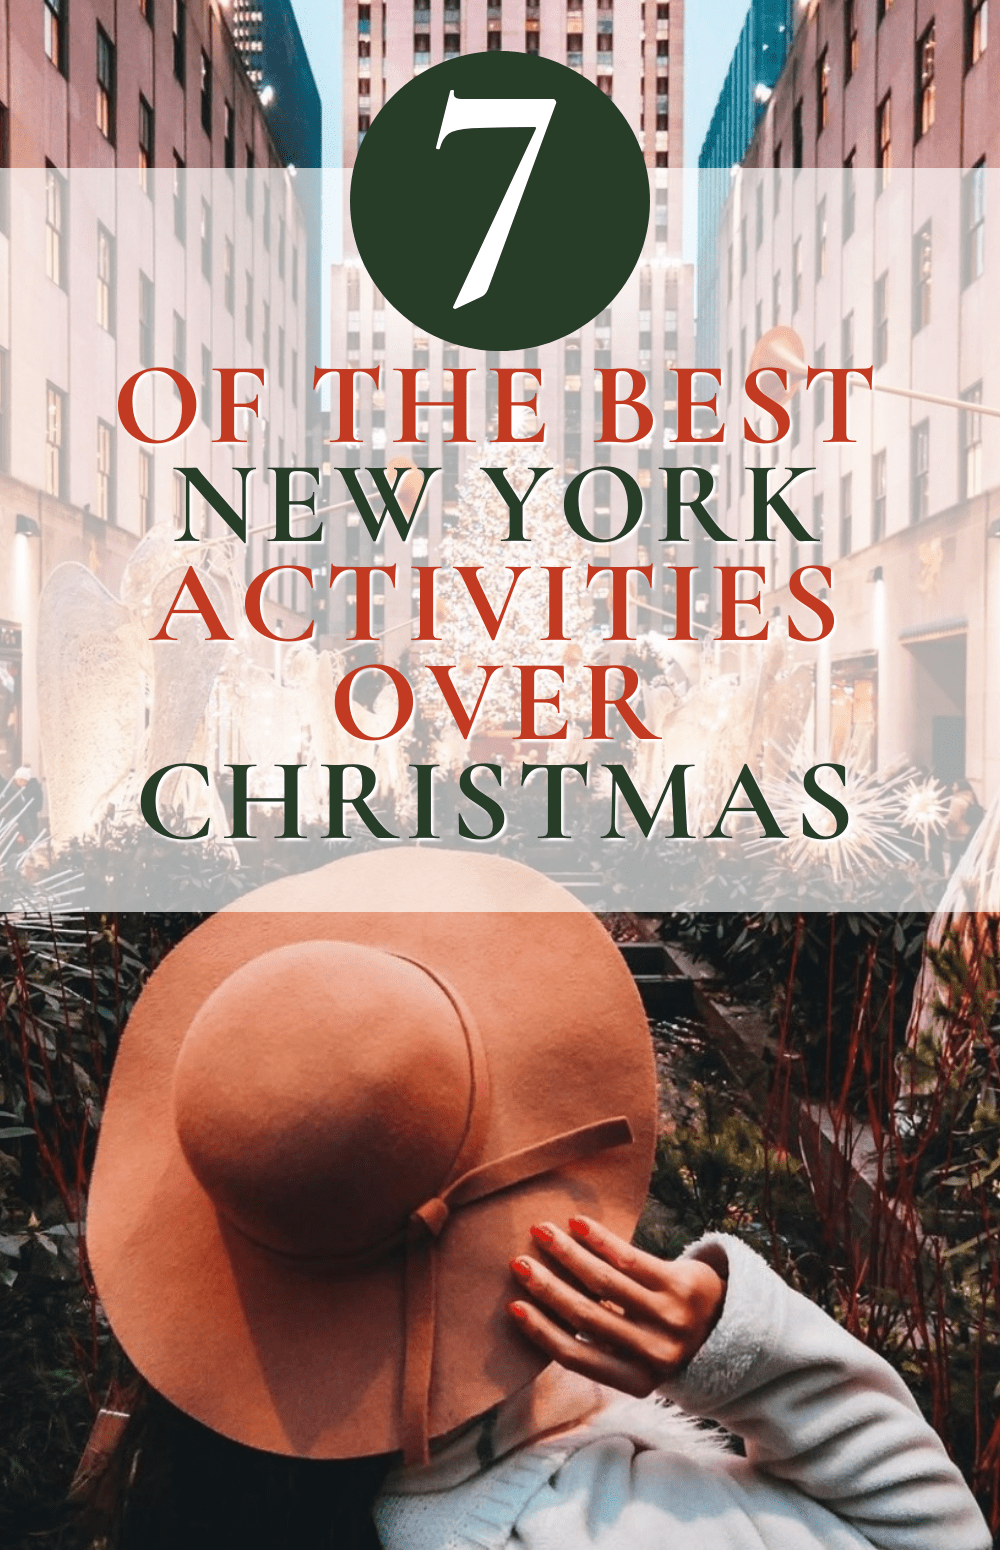 My top 7 things to do in New York this Christmas